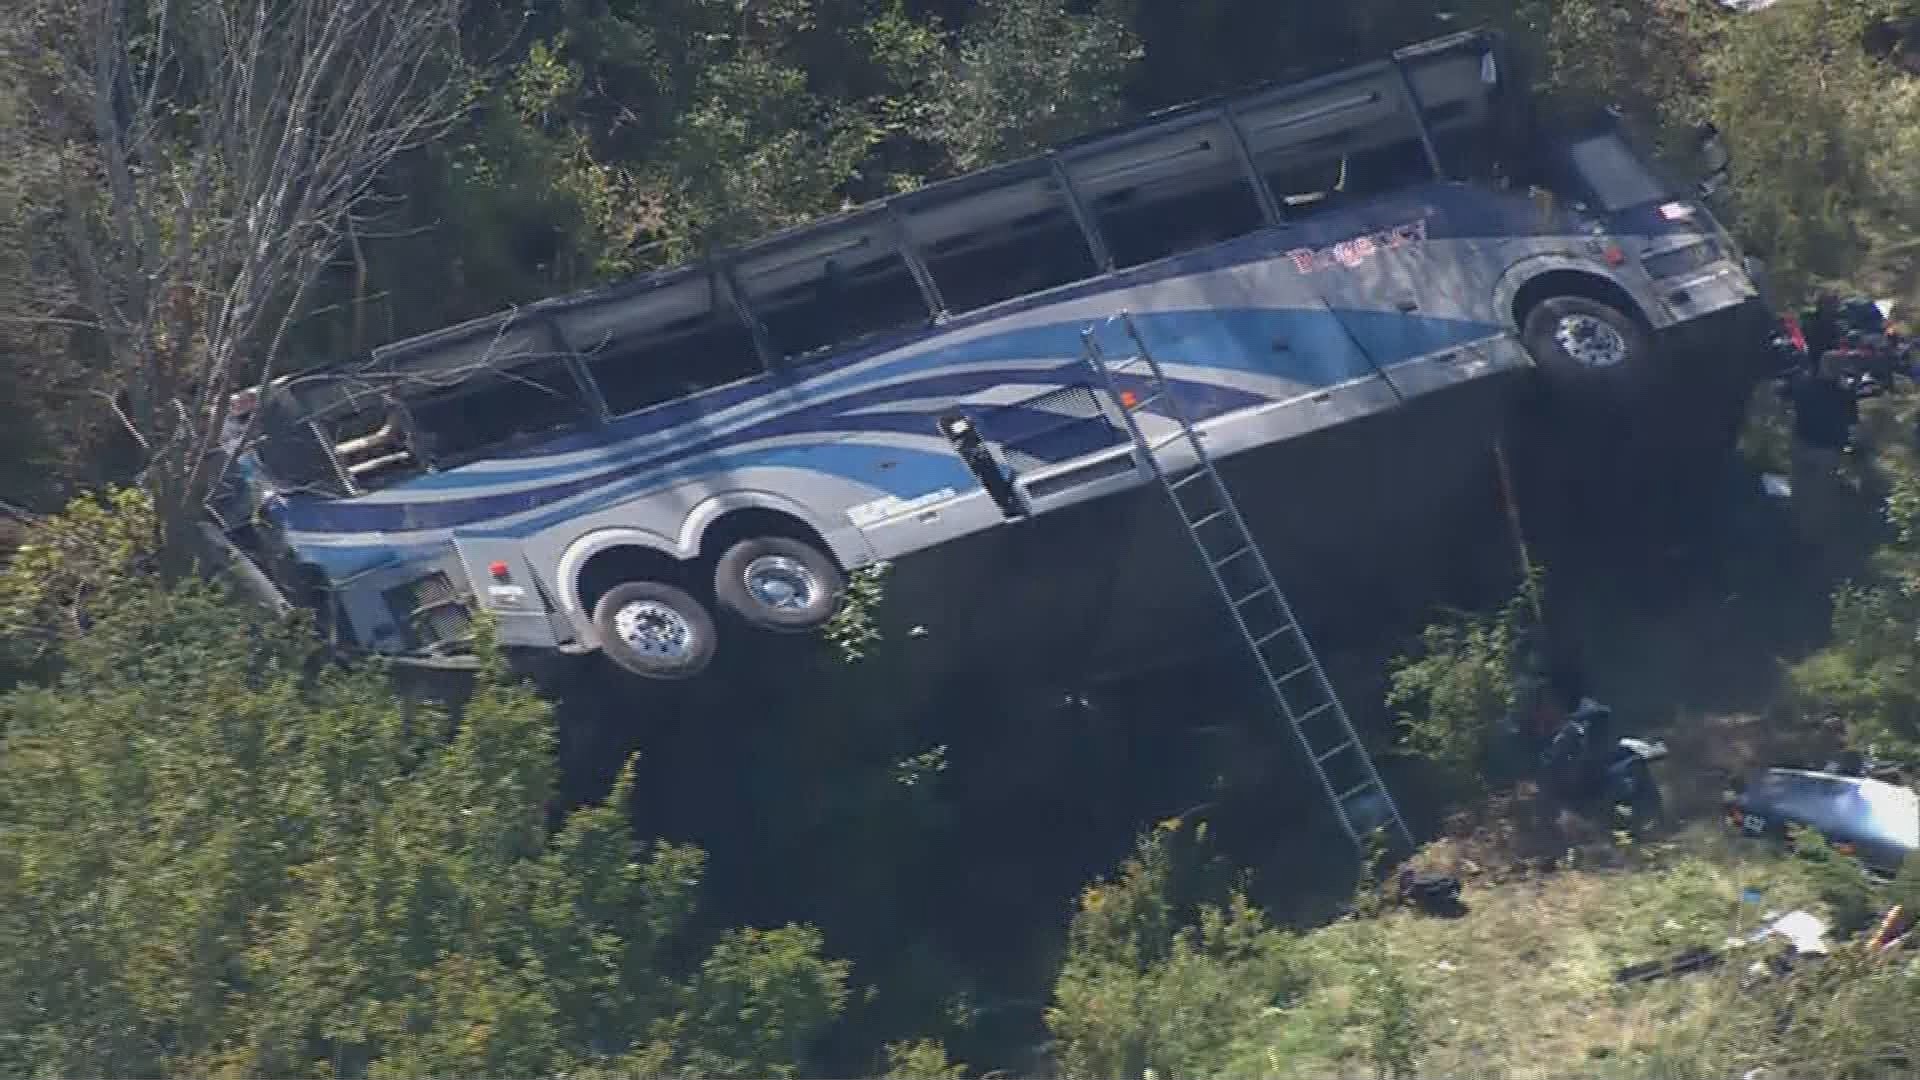 At least one person is dead and multiple others hurt in a charter bus crash Thursday on I-84 in Orange County, New York, according to CBS New York.